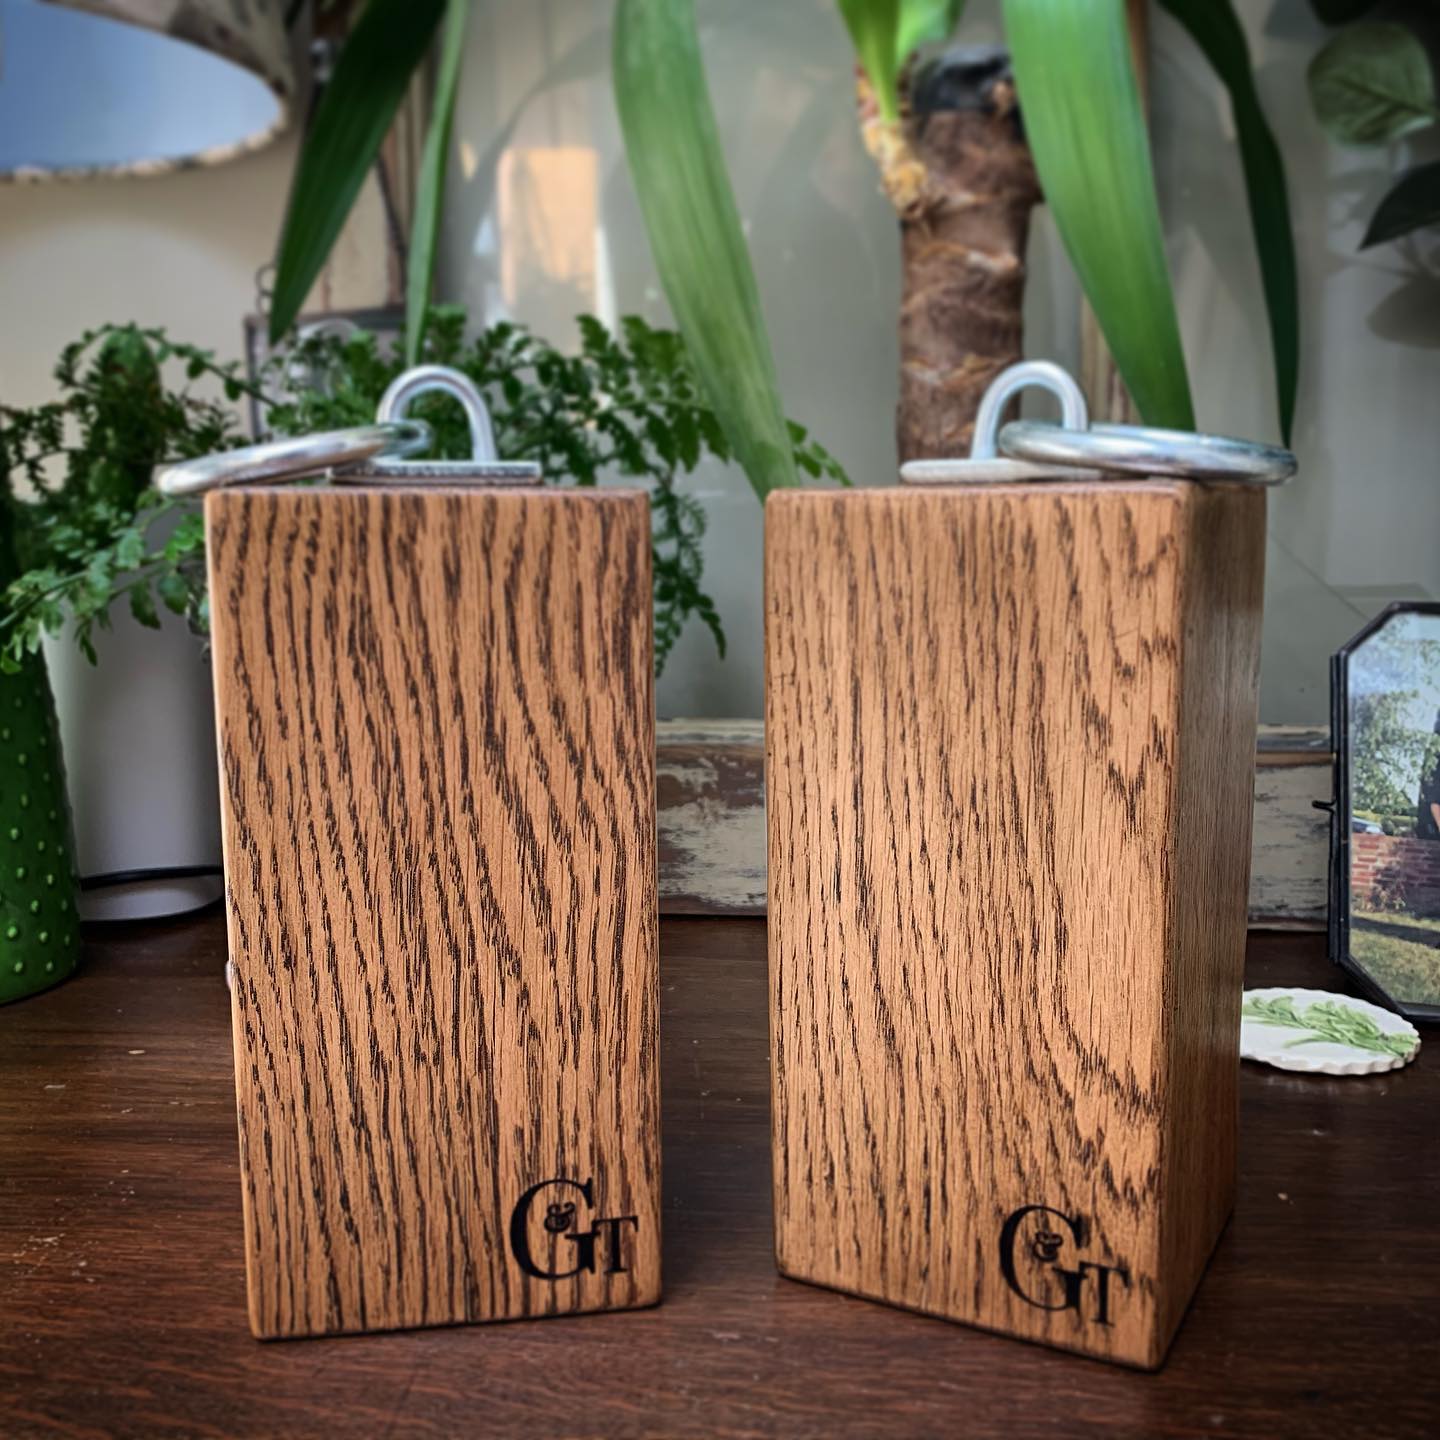 A couple of lovely oak doorstops in the post today, we just love how each one has its own character! ..#handcrafted #homewares #springtime #opendoor #gingerandtweed #smallbusiness #uniquegift #happydance #weekendvibes